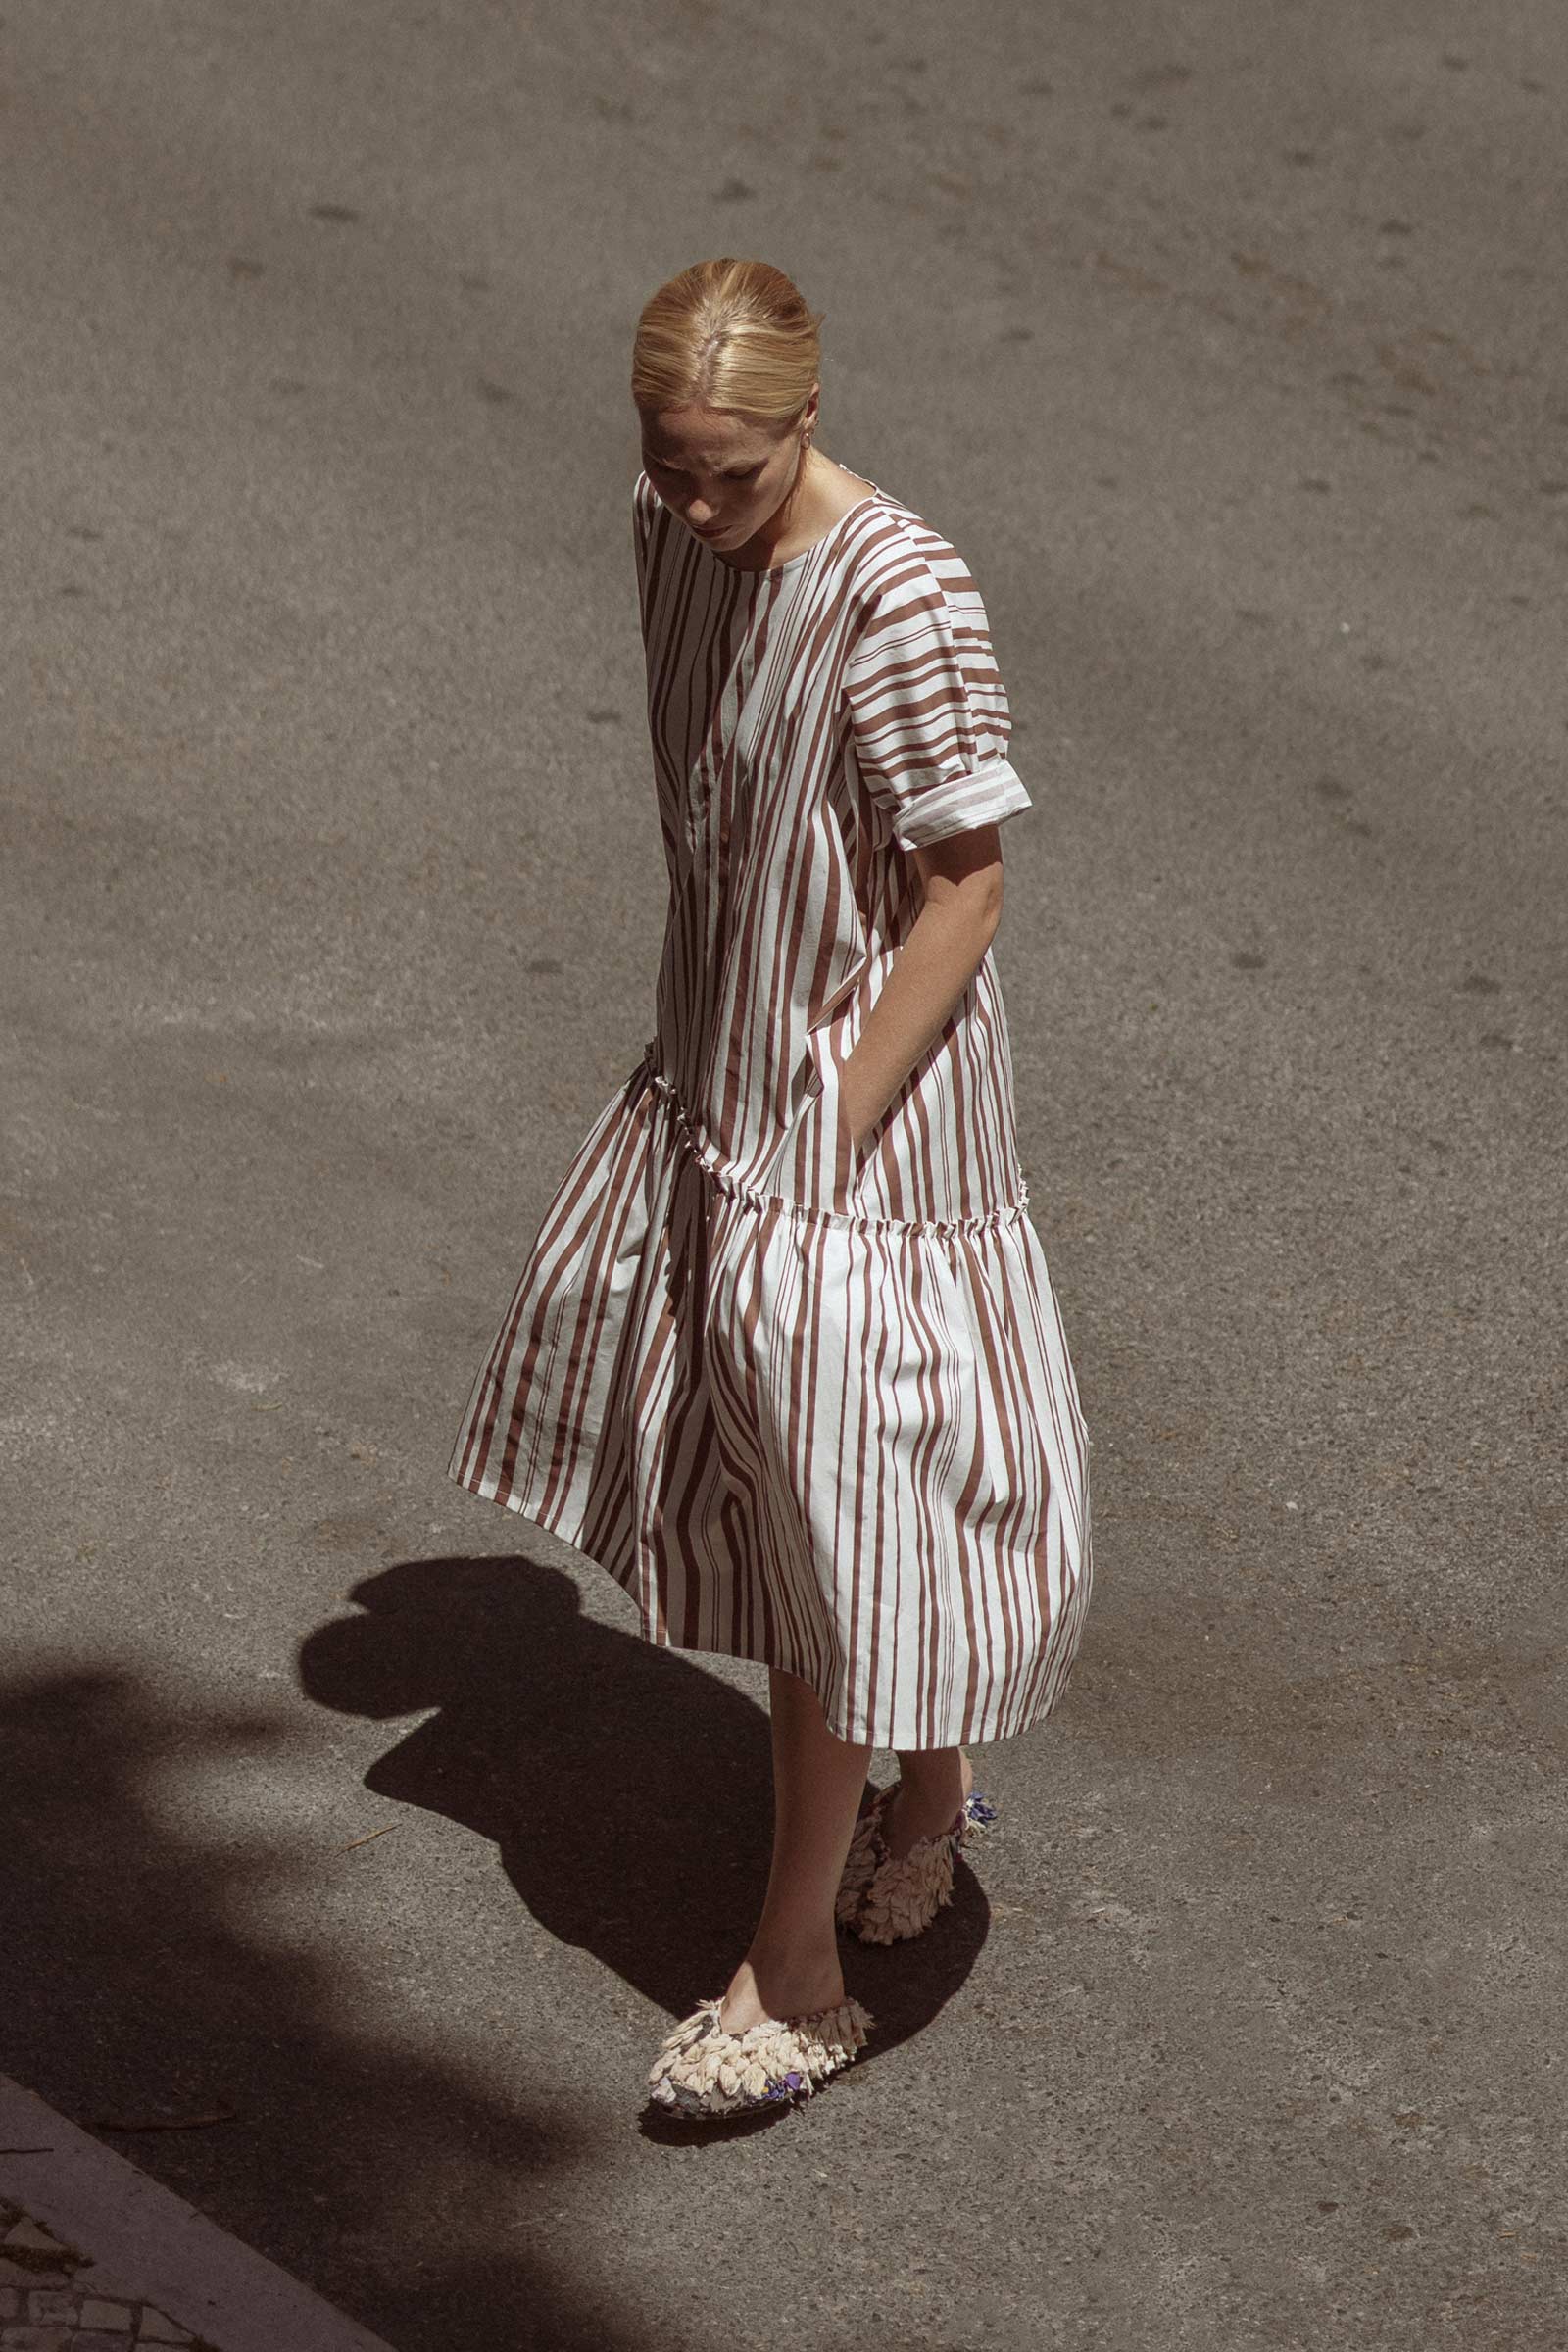 Model wearing 10 to 10 oversized striped white and chestnut dress